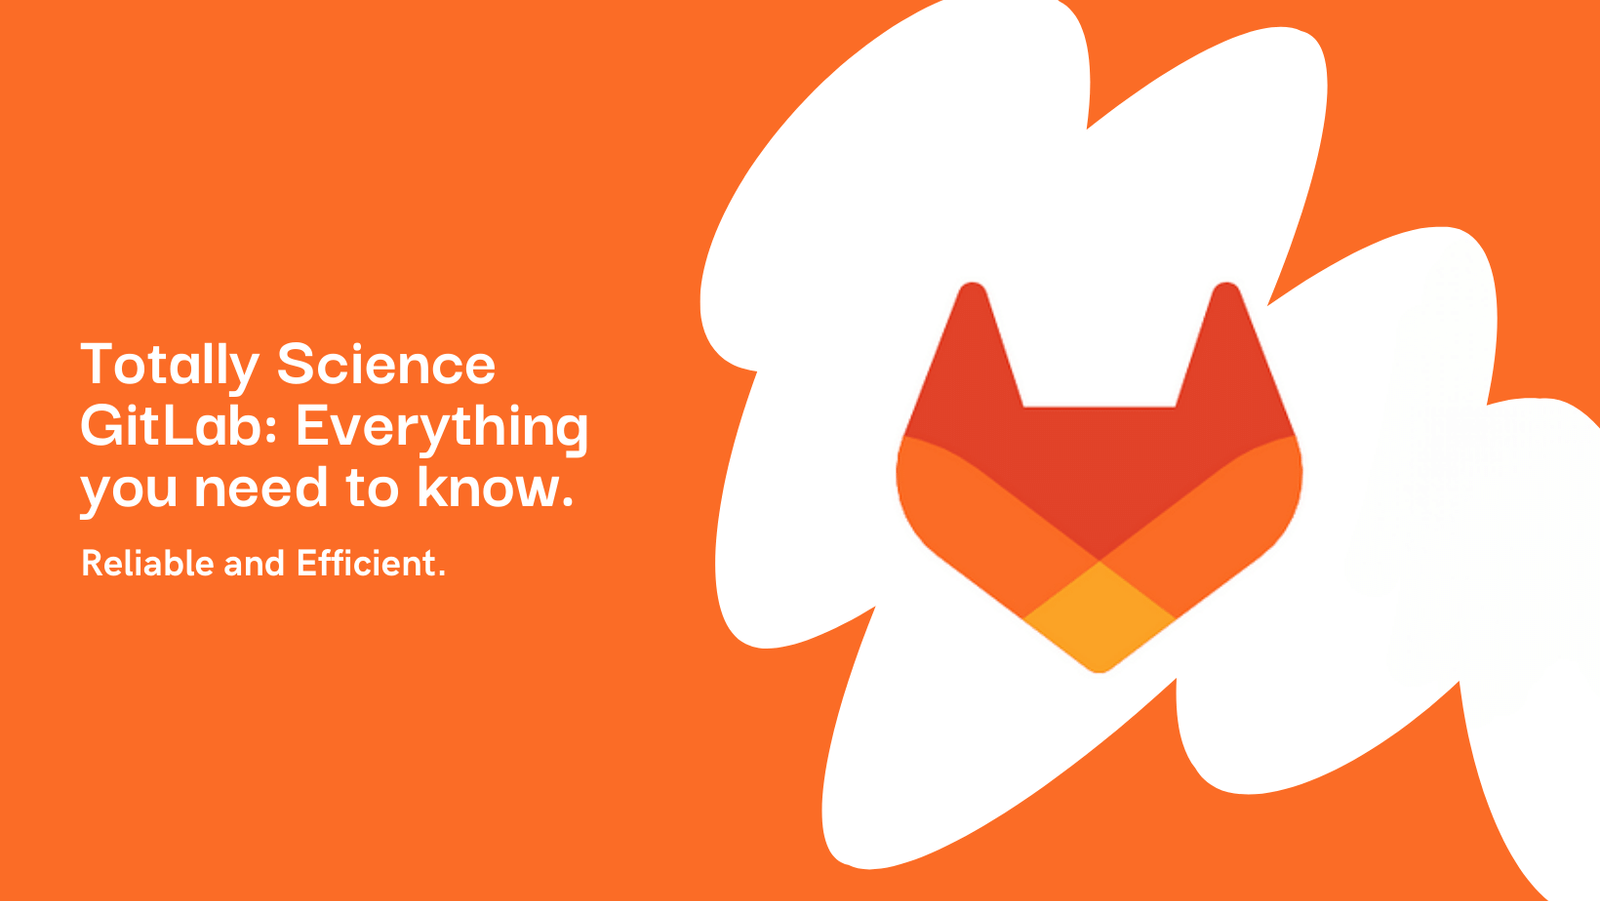 What is Totally Science GitLab and Why You Need It